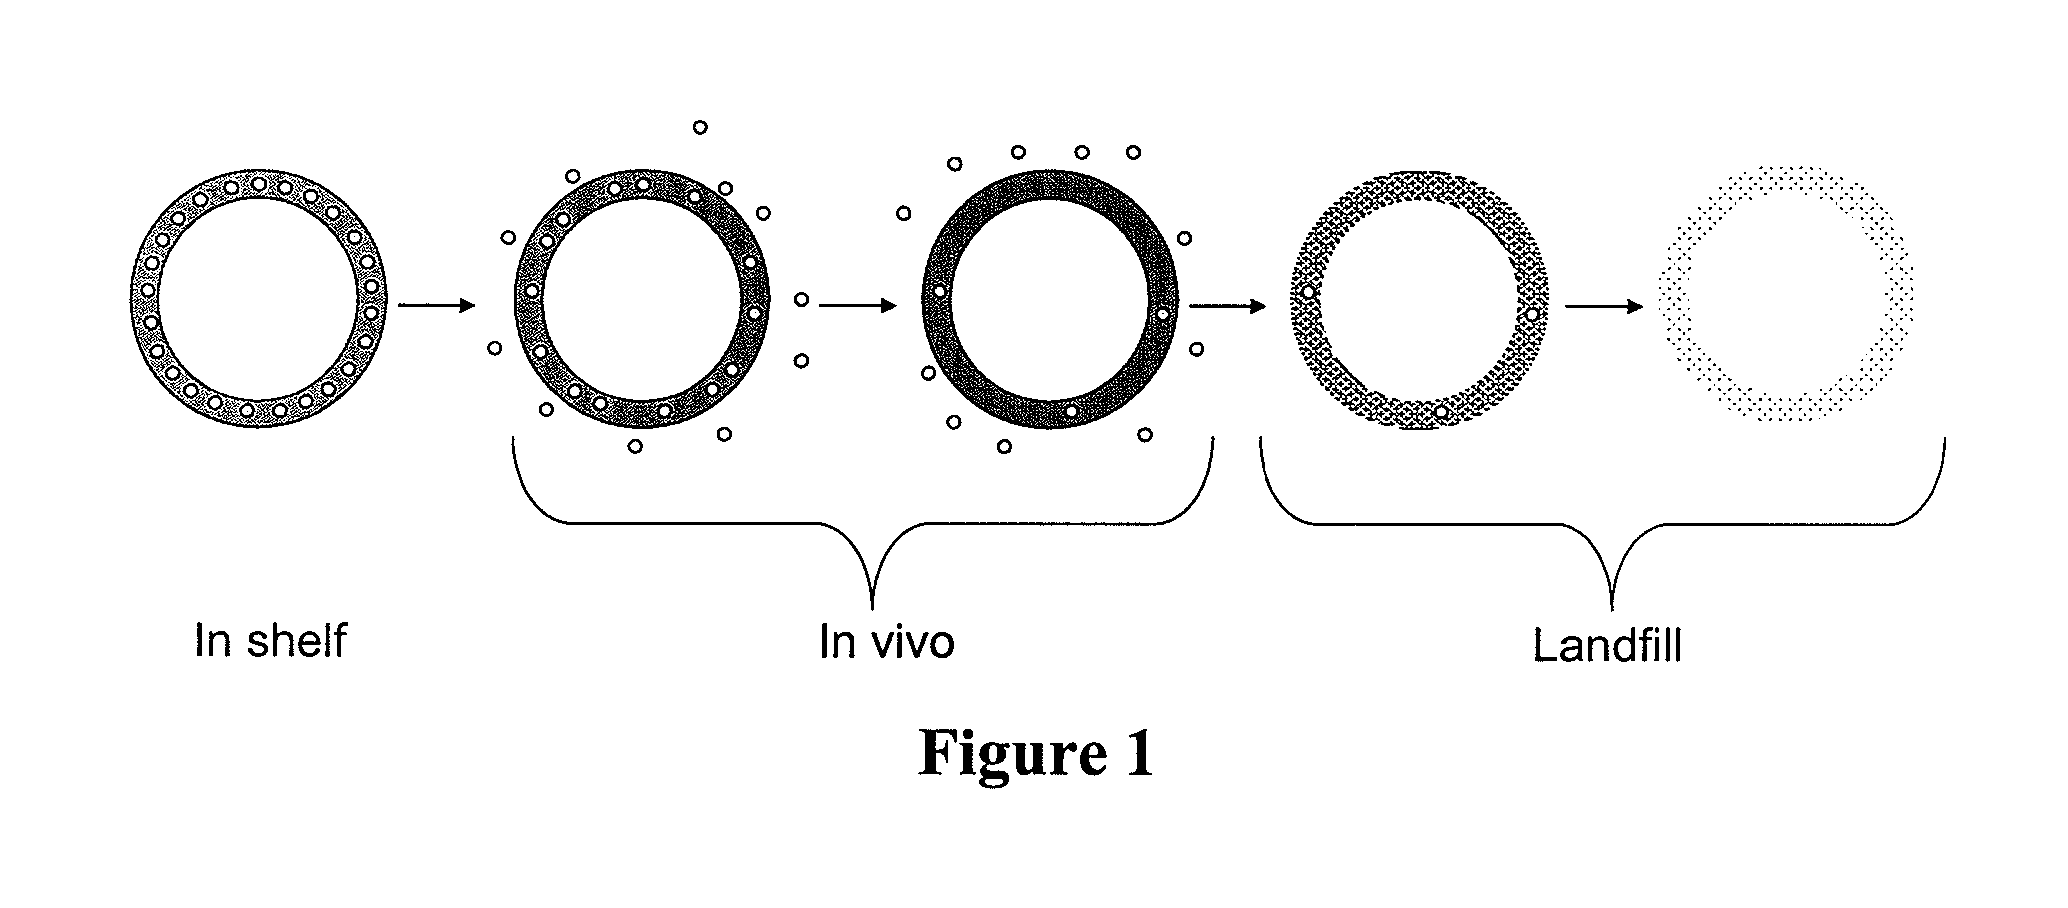 Biodegradable intravaginal devices for delivery of therapeutics